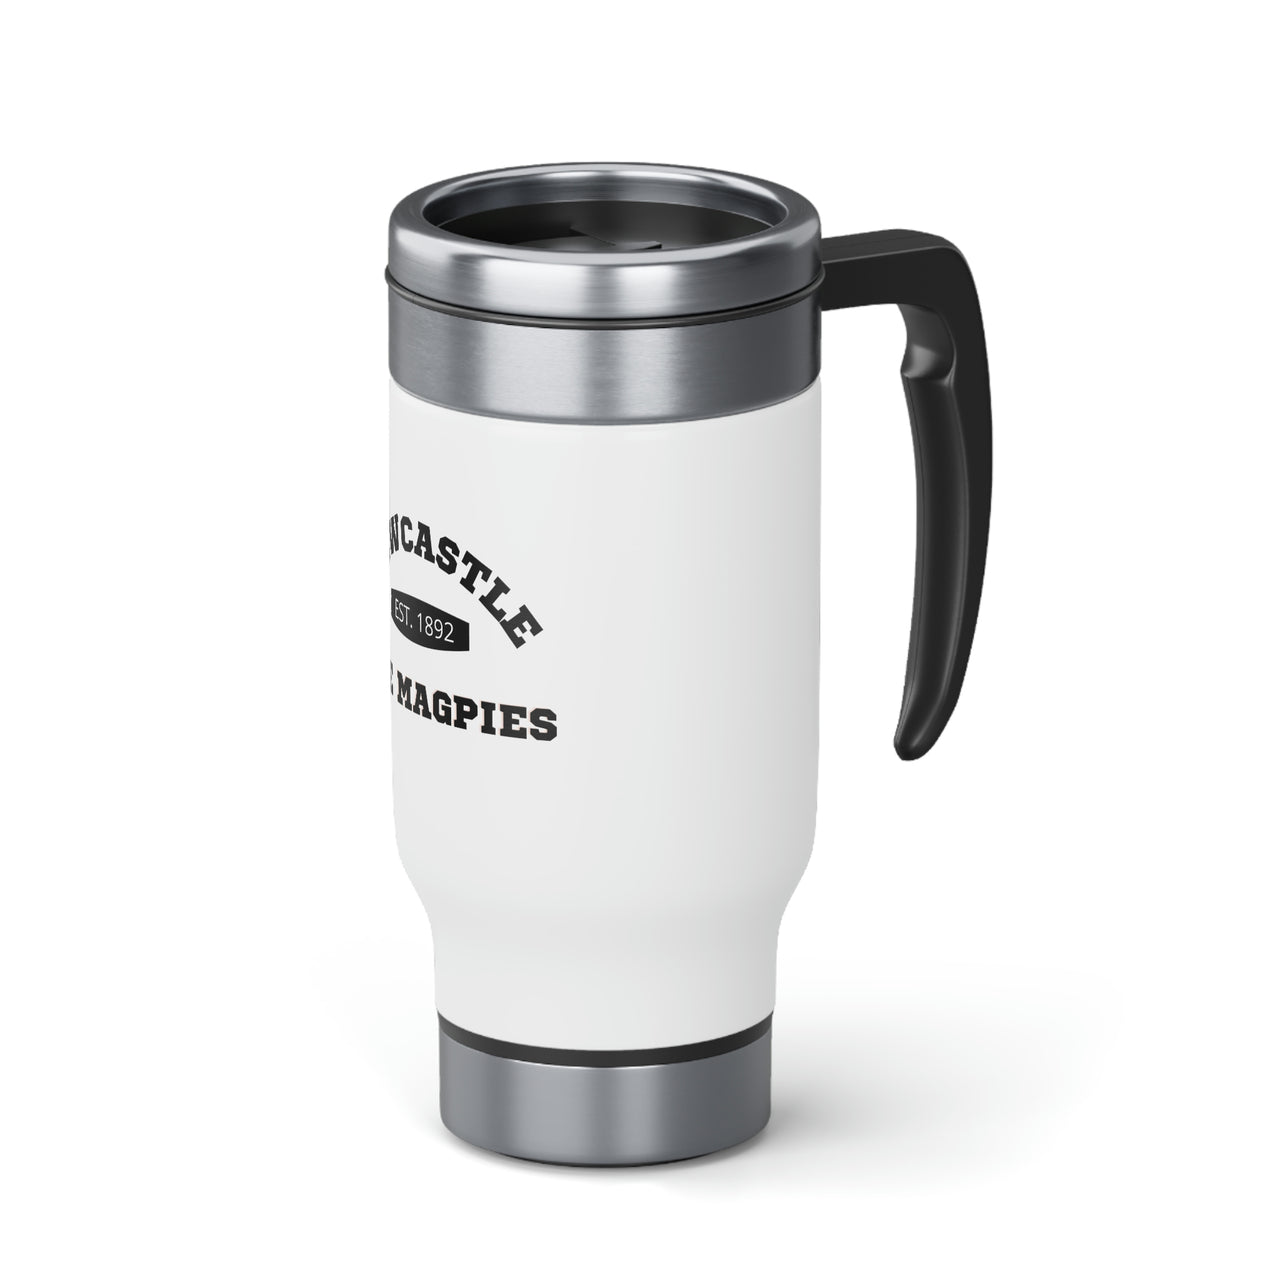 Newcastle Stainless Steel Travel Mug with Handle, 14oz